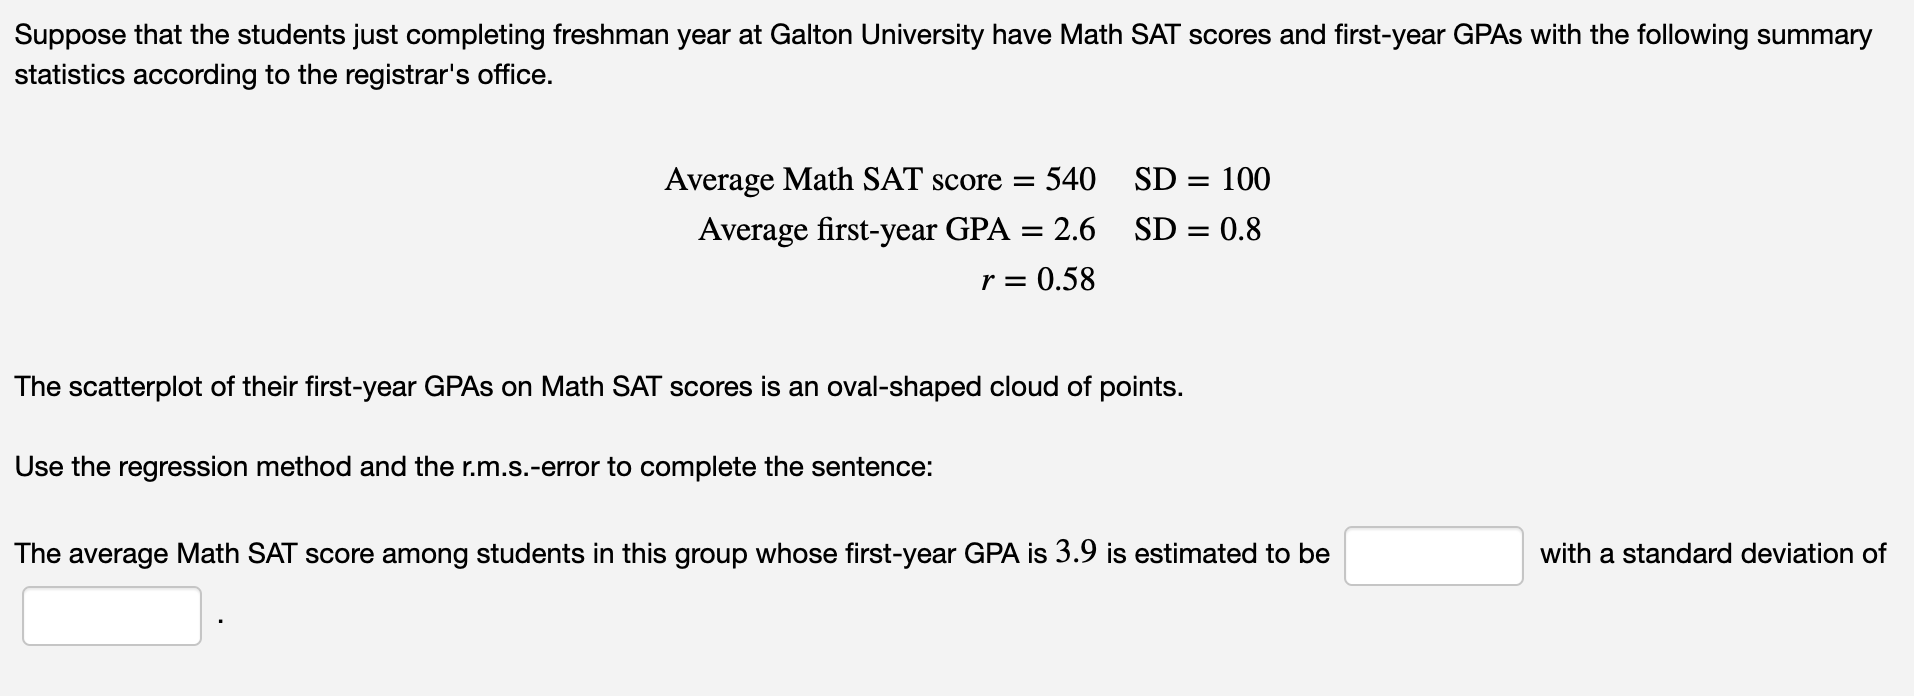 Suppose that the students just completing freshman year at Galton University have Math SAT scores and first-year GPAS with the following summary
statistics according to the registrar's office.
Average Math SAT score =
540
SD = 100
Average first-year GPA = 2.6
r = 0.58
SD = 0.8
The scatterplot of their first-year GPAS on Math SAT scores is an oval-shaped cloud of points.
Use the regression method and the r.m.s.-error to complete the sentence:
The average Math SAT score among students in this group whose first-year GPA is 3.9 is estimated to be
with a standard deviation of
